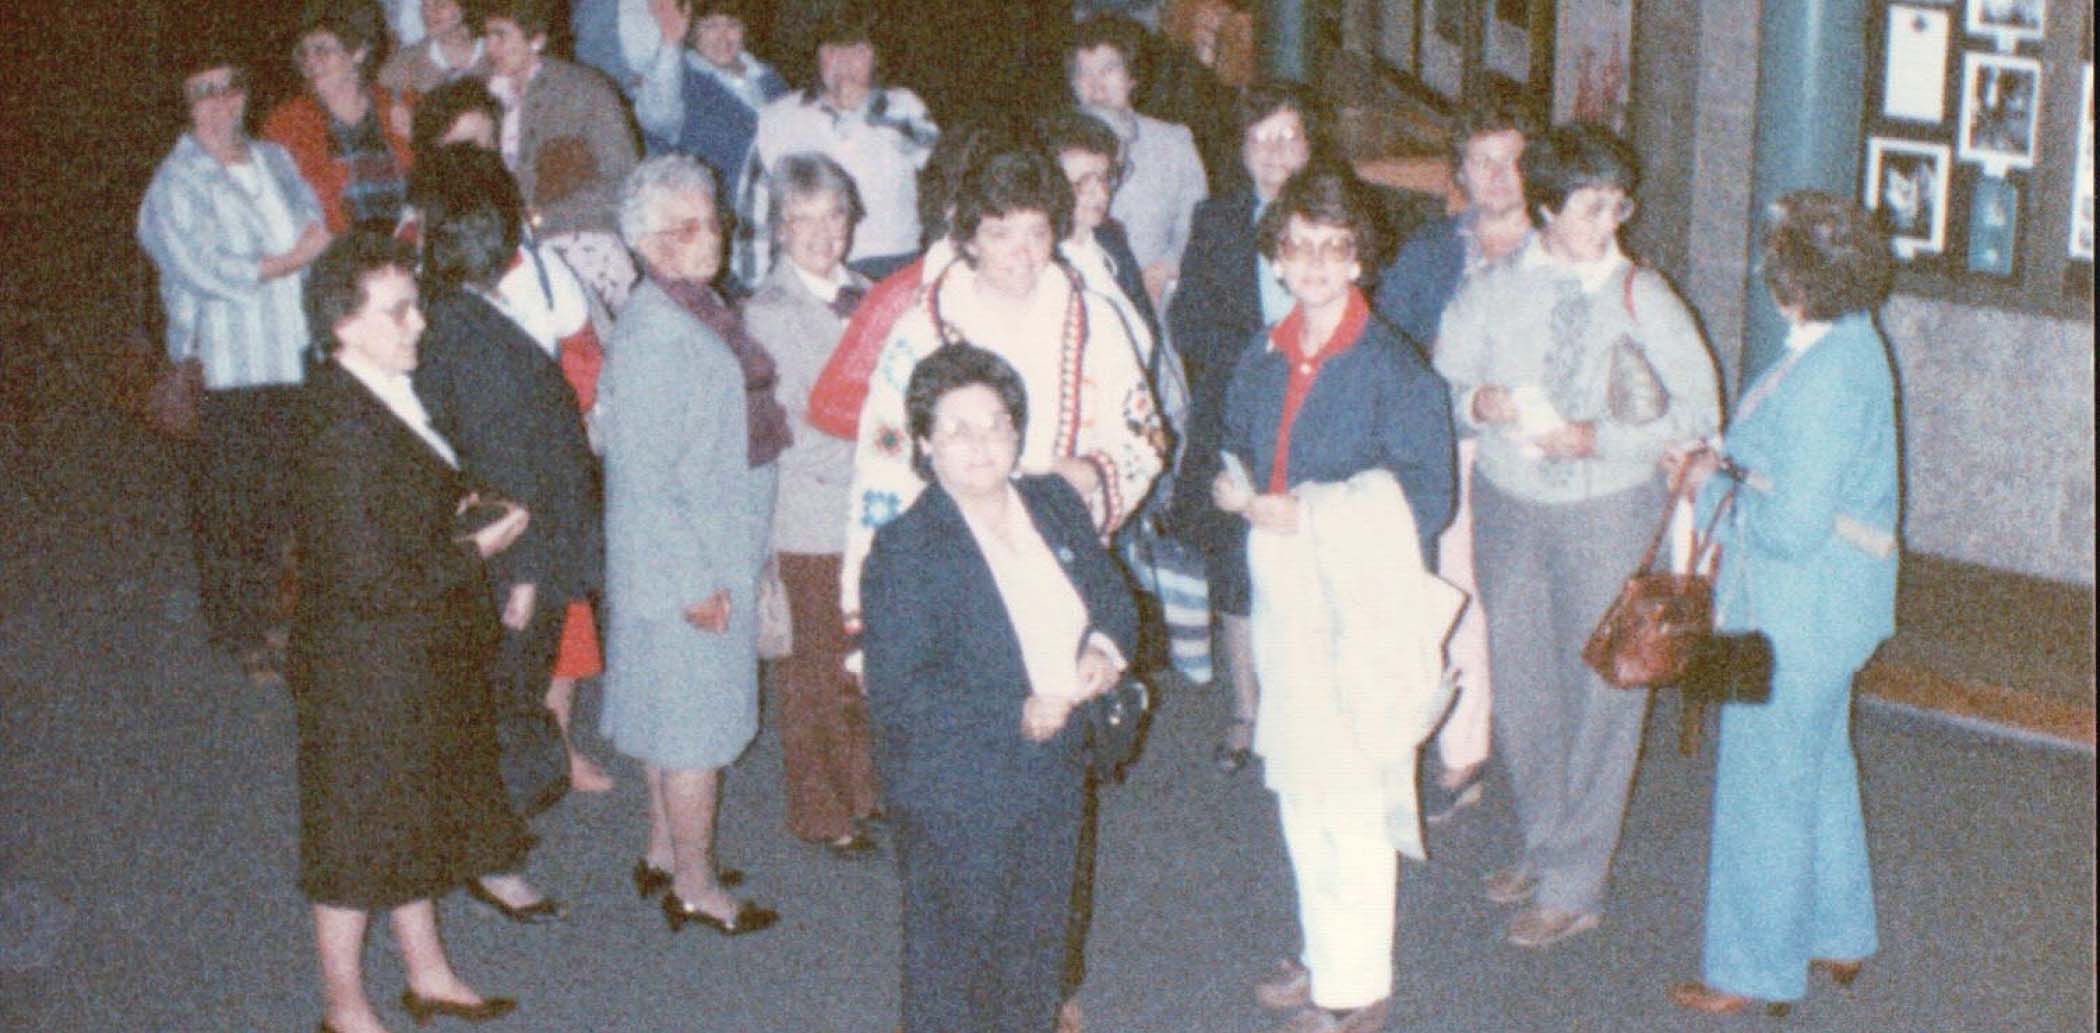 Members of the Northeast Iowa Quilters Guild on their first group travel experience to The Quilt Expo (now The Great Wisconsin Quilt Show) in 1986.